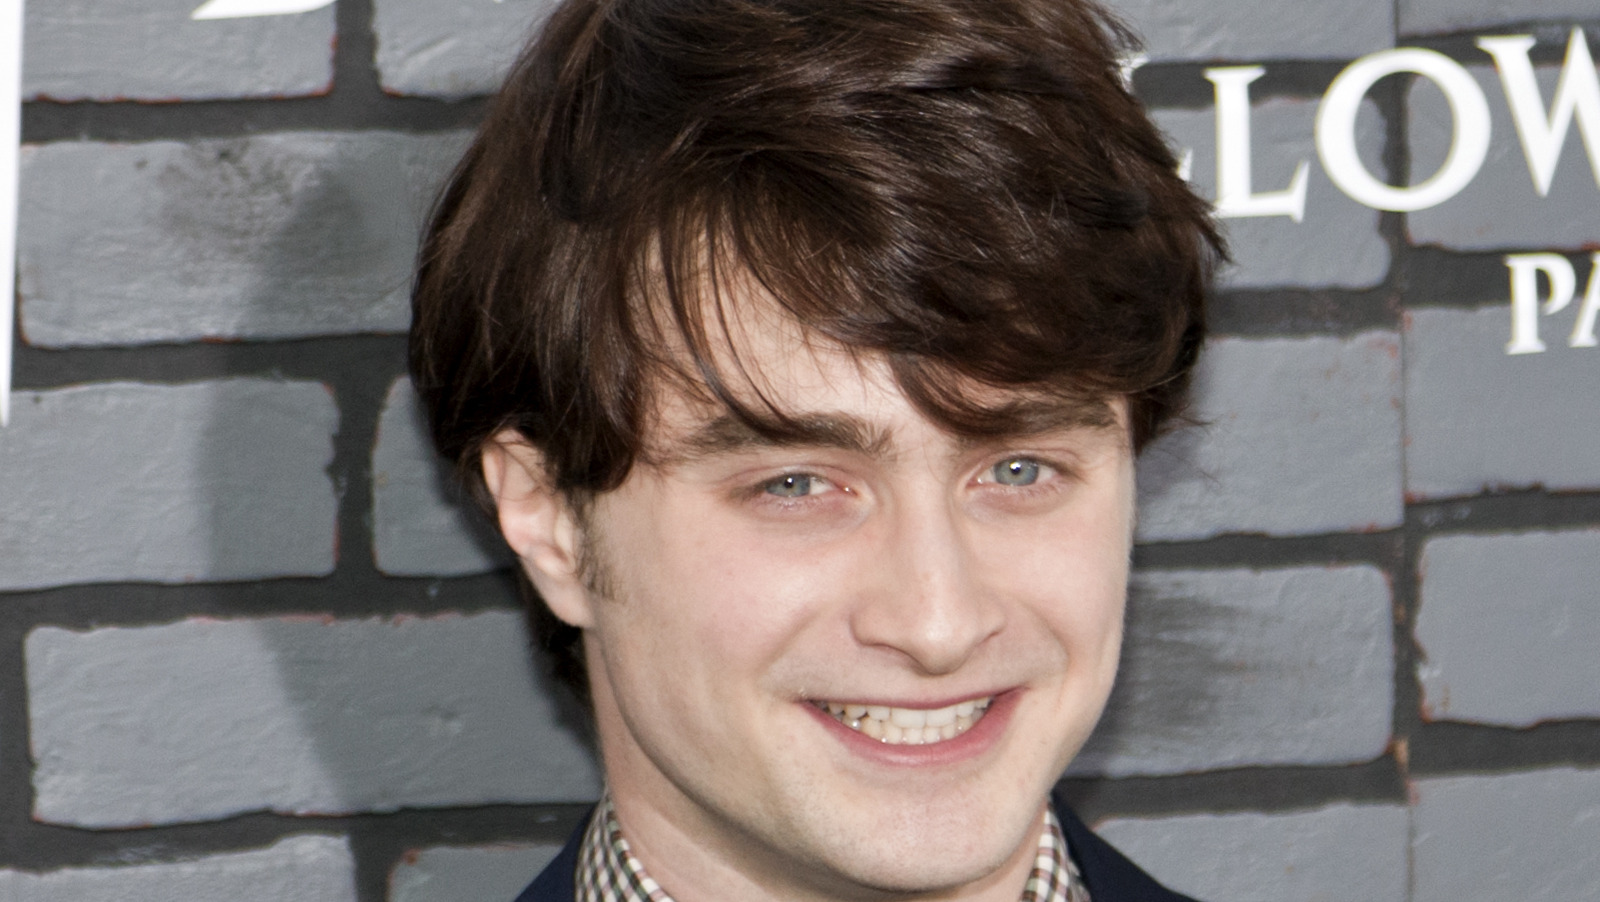 14+ Actors Who Almost Played Key Characters in “Harry Potter